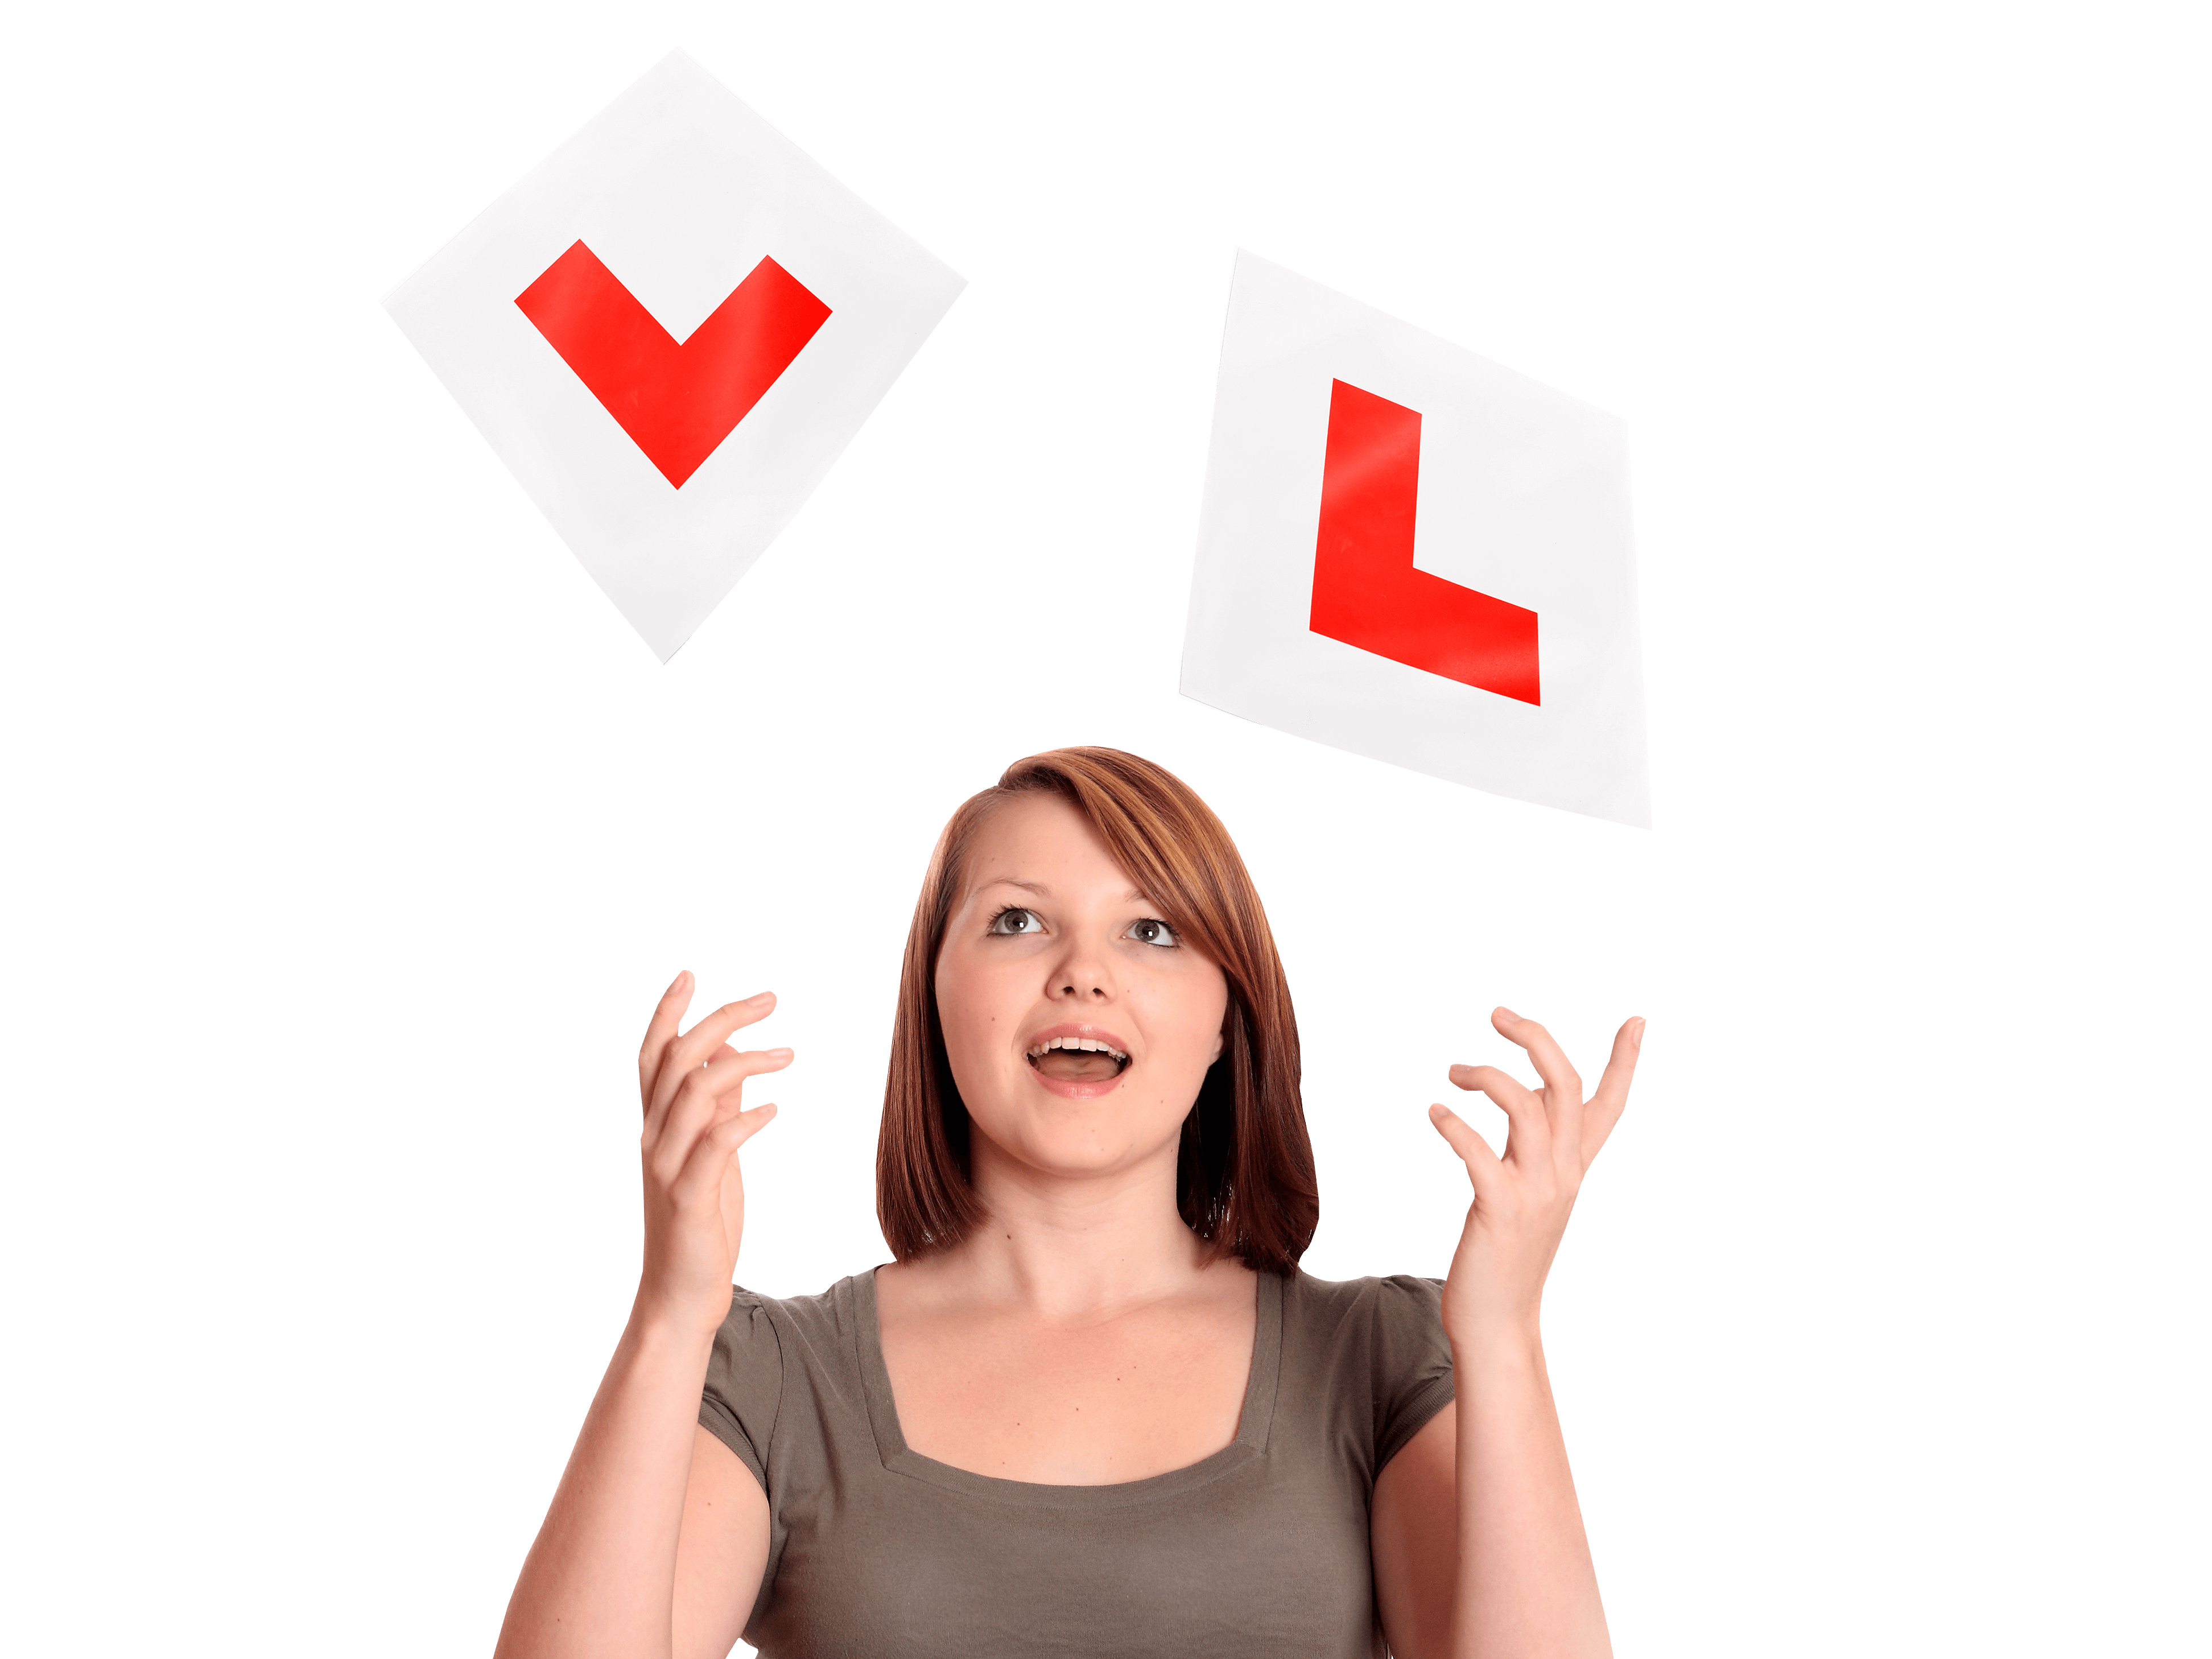 Find a driving instructor - search